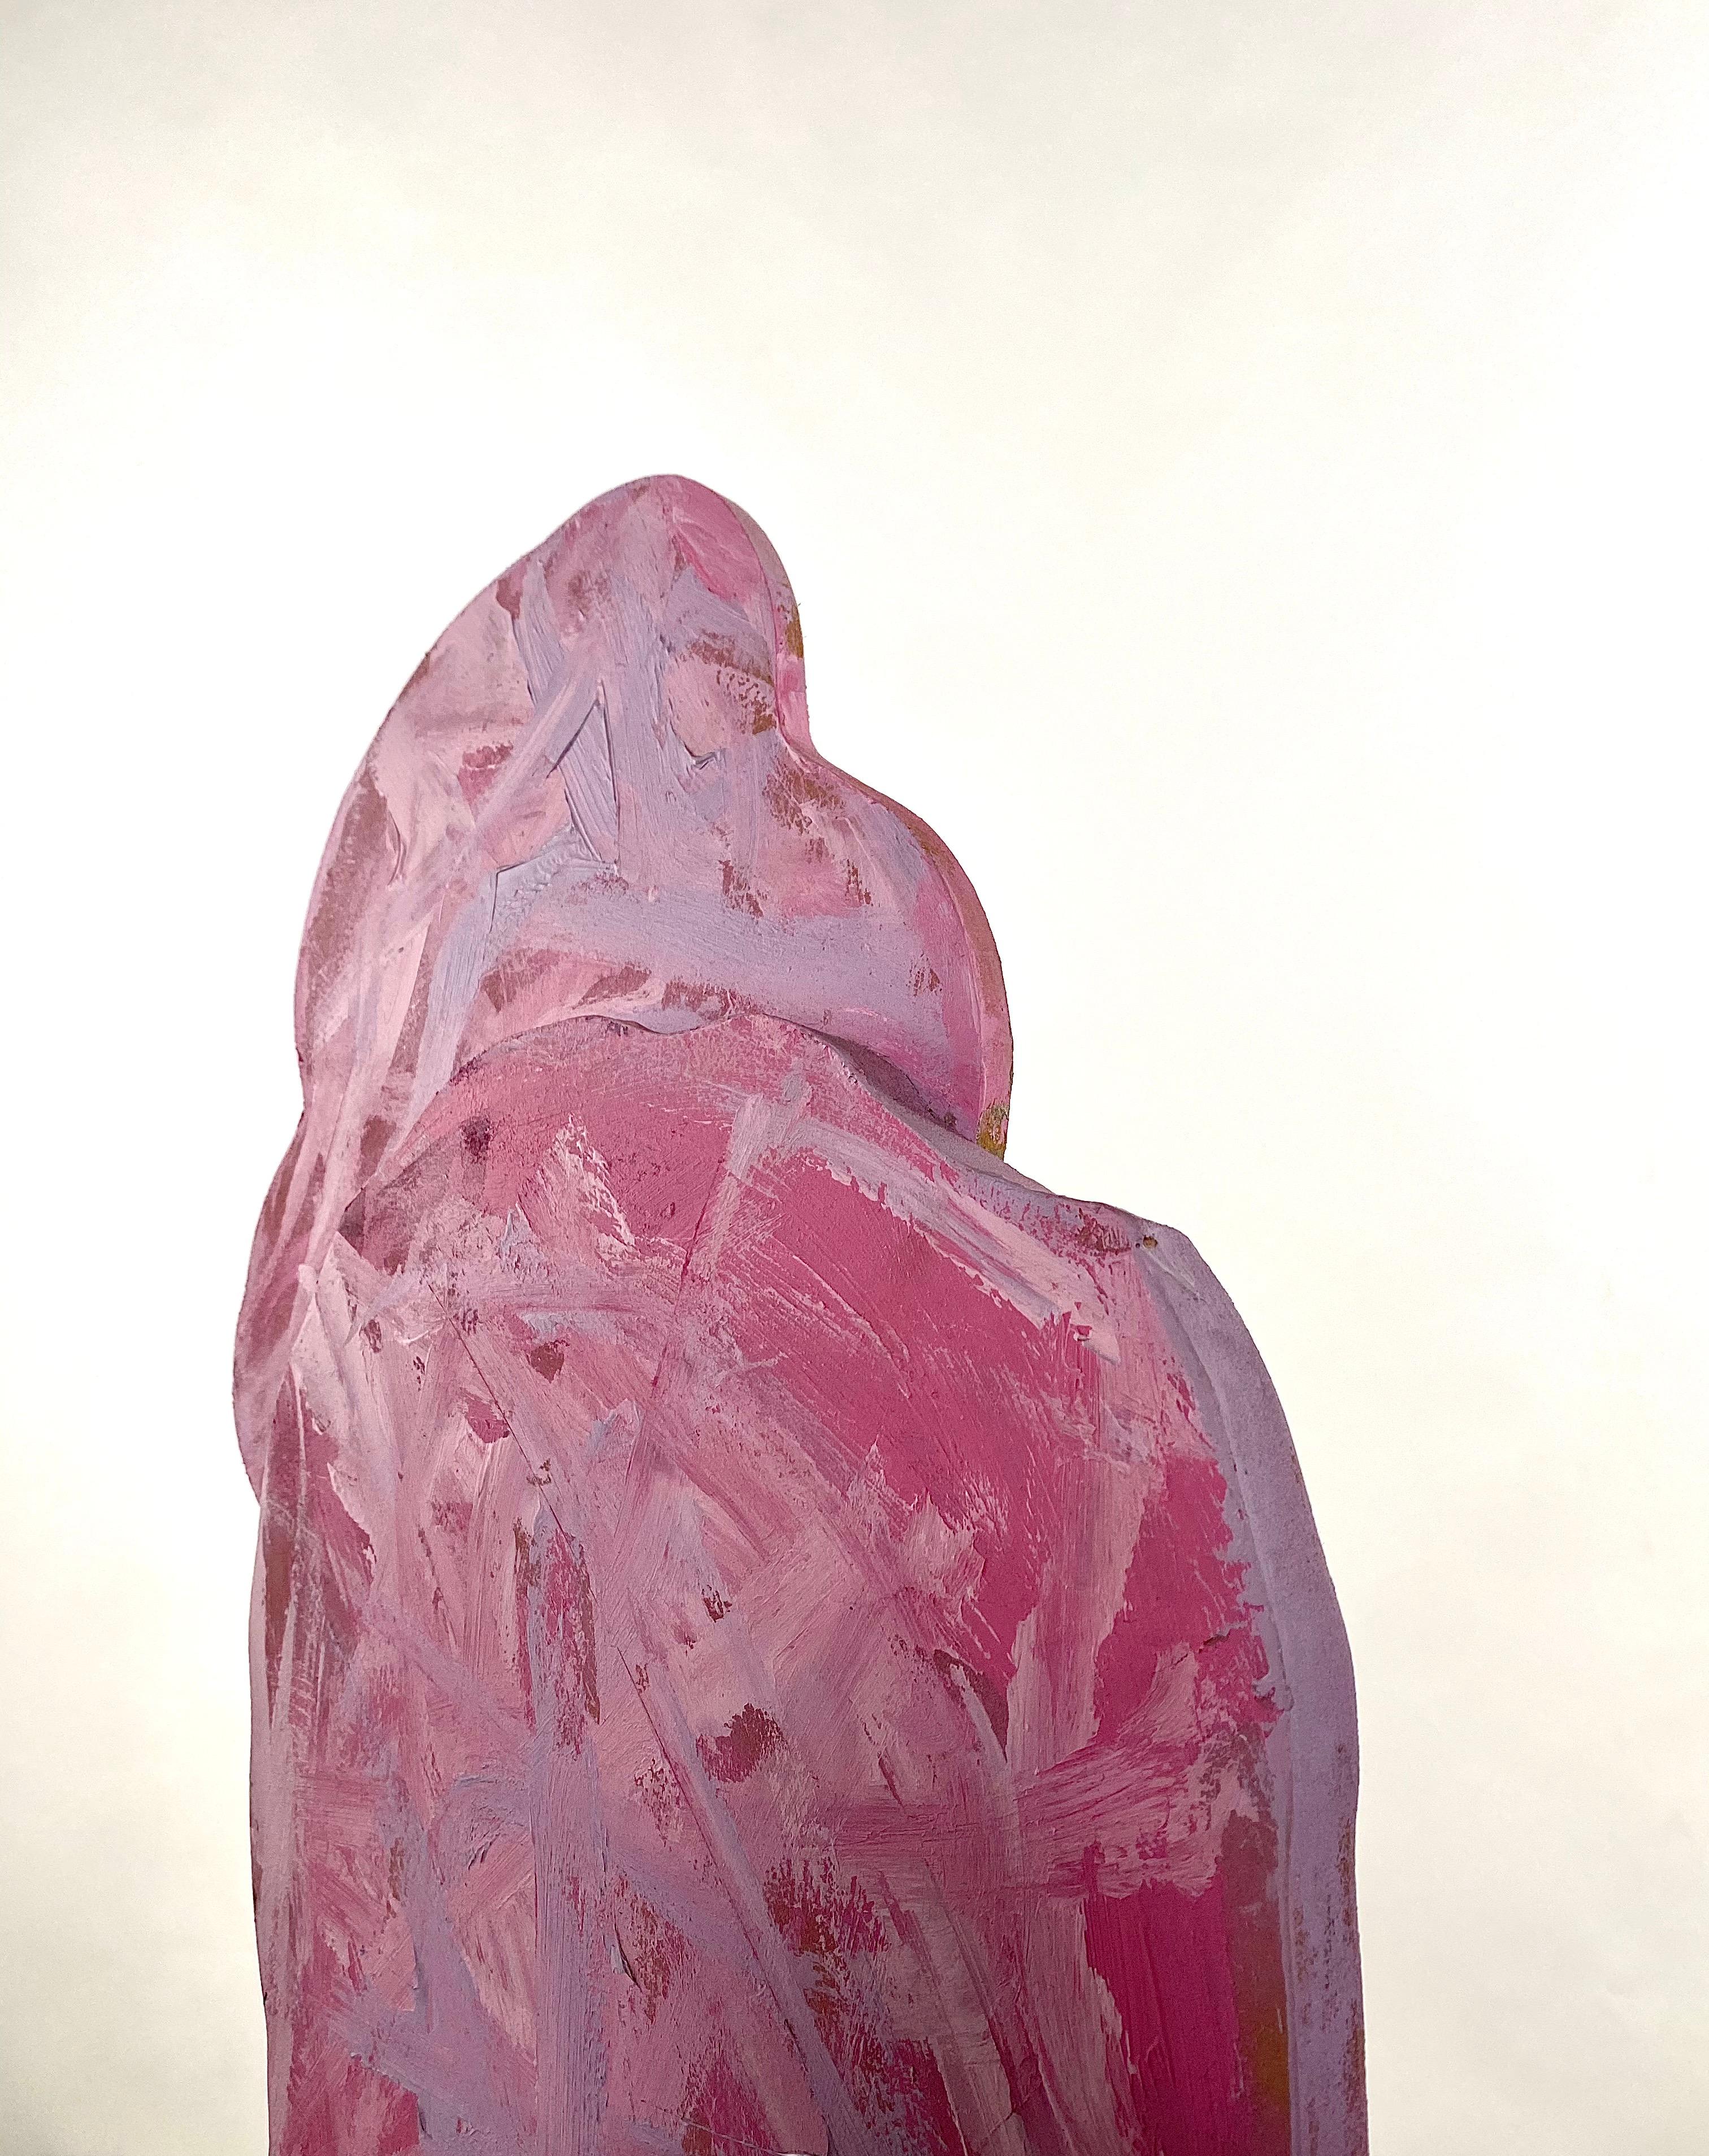 Pink Face Sculptural Wood Chair, 21st Century by Mattia Biagi For Sale 1